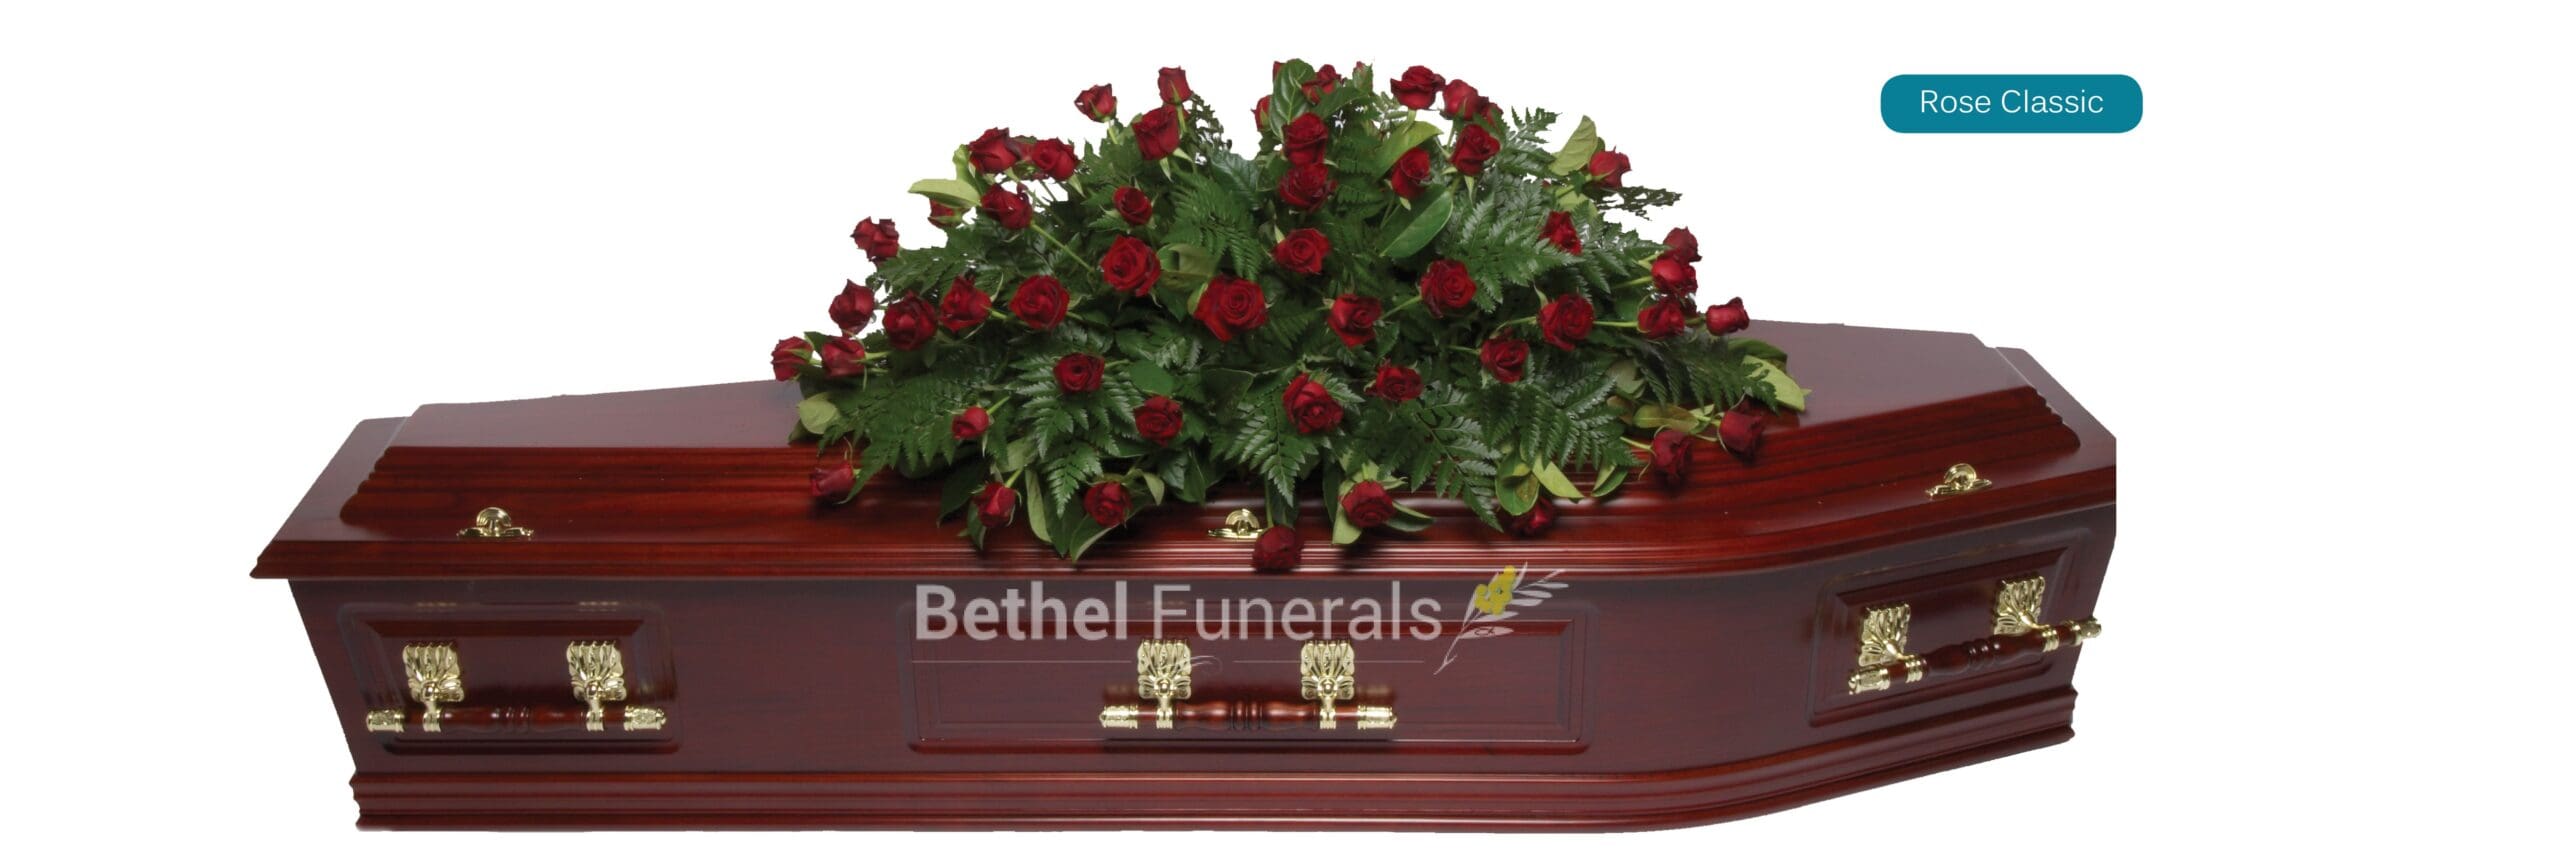 Rose classic flowers on coffin